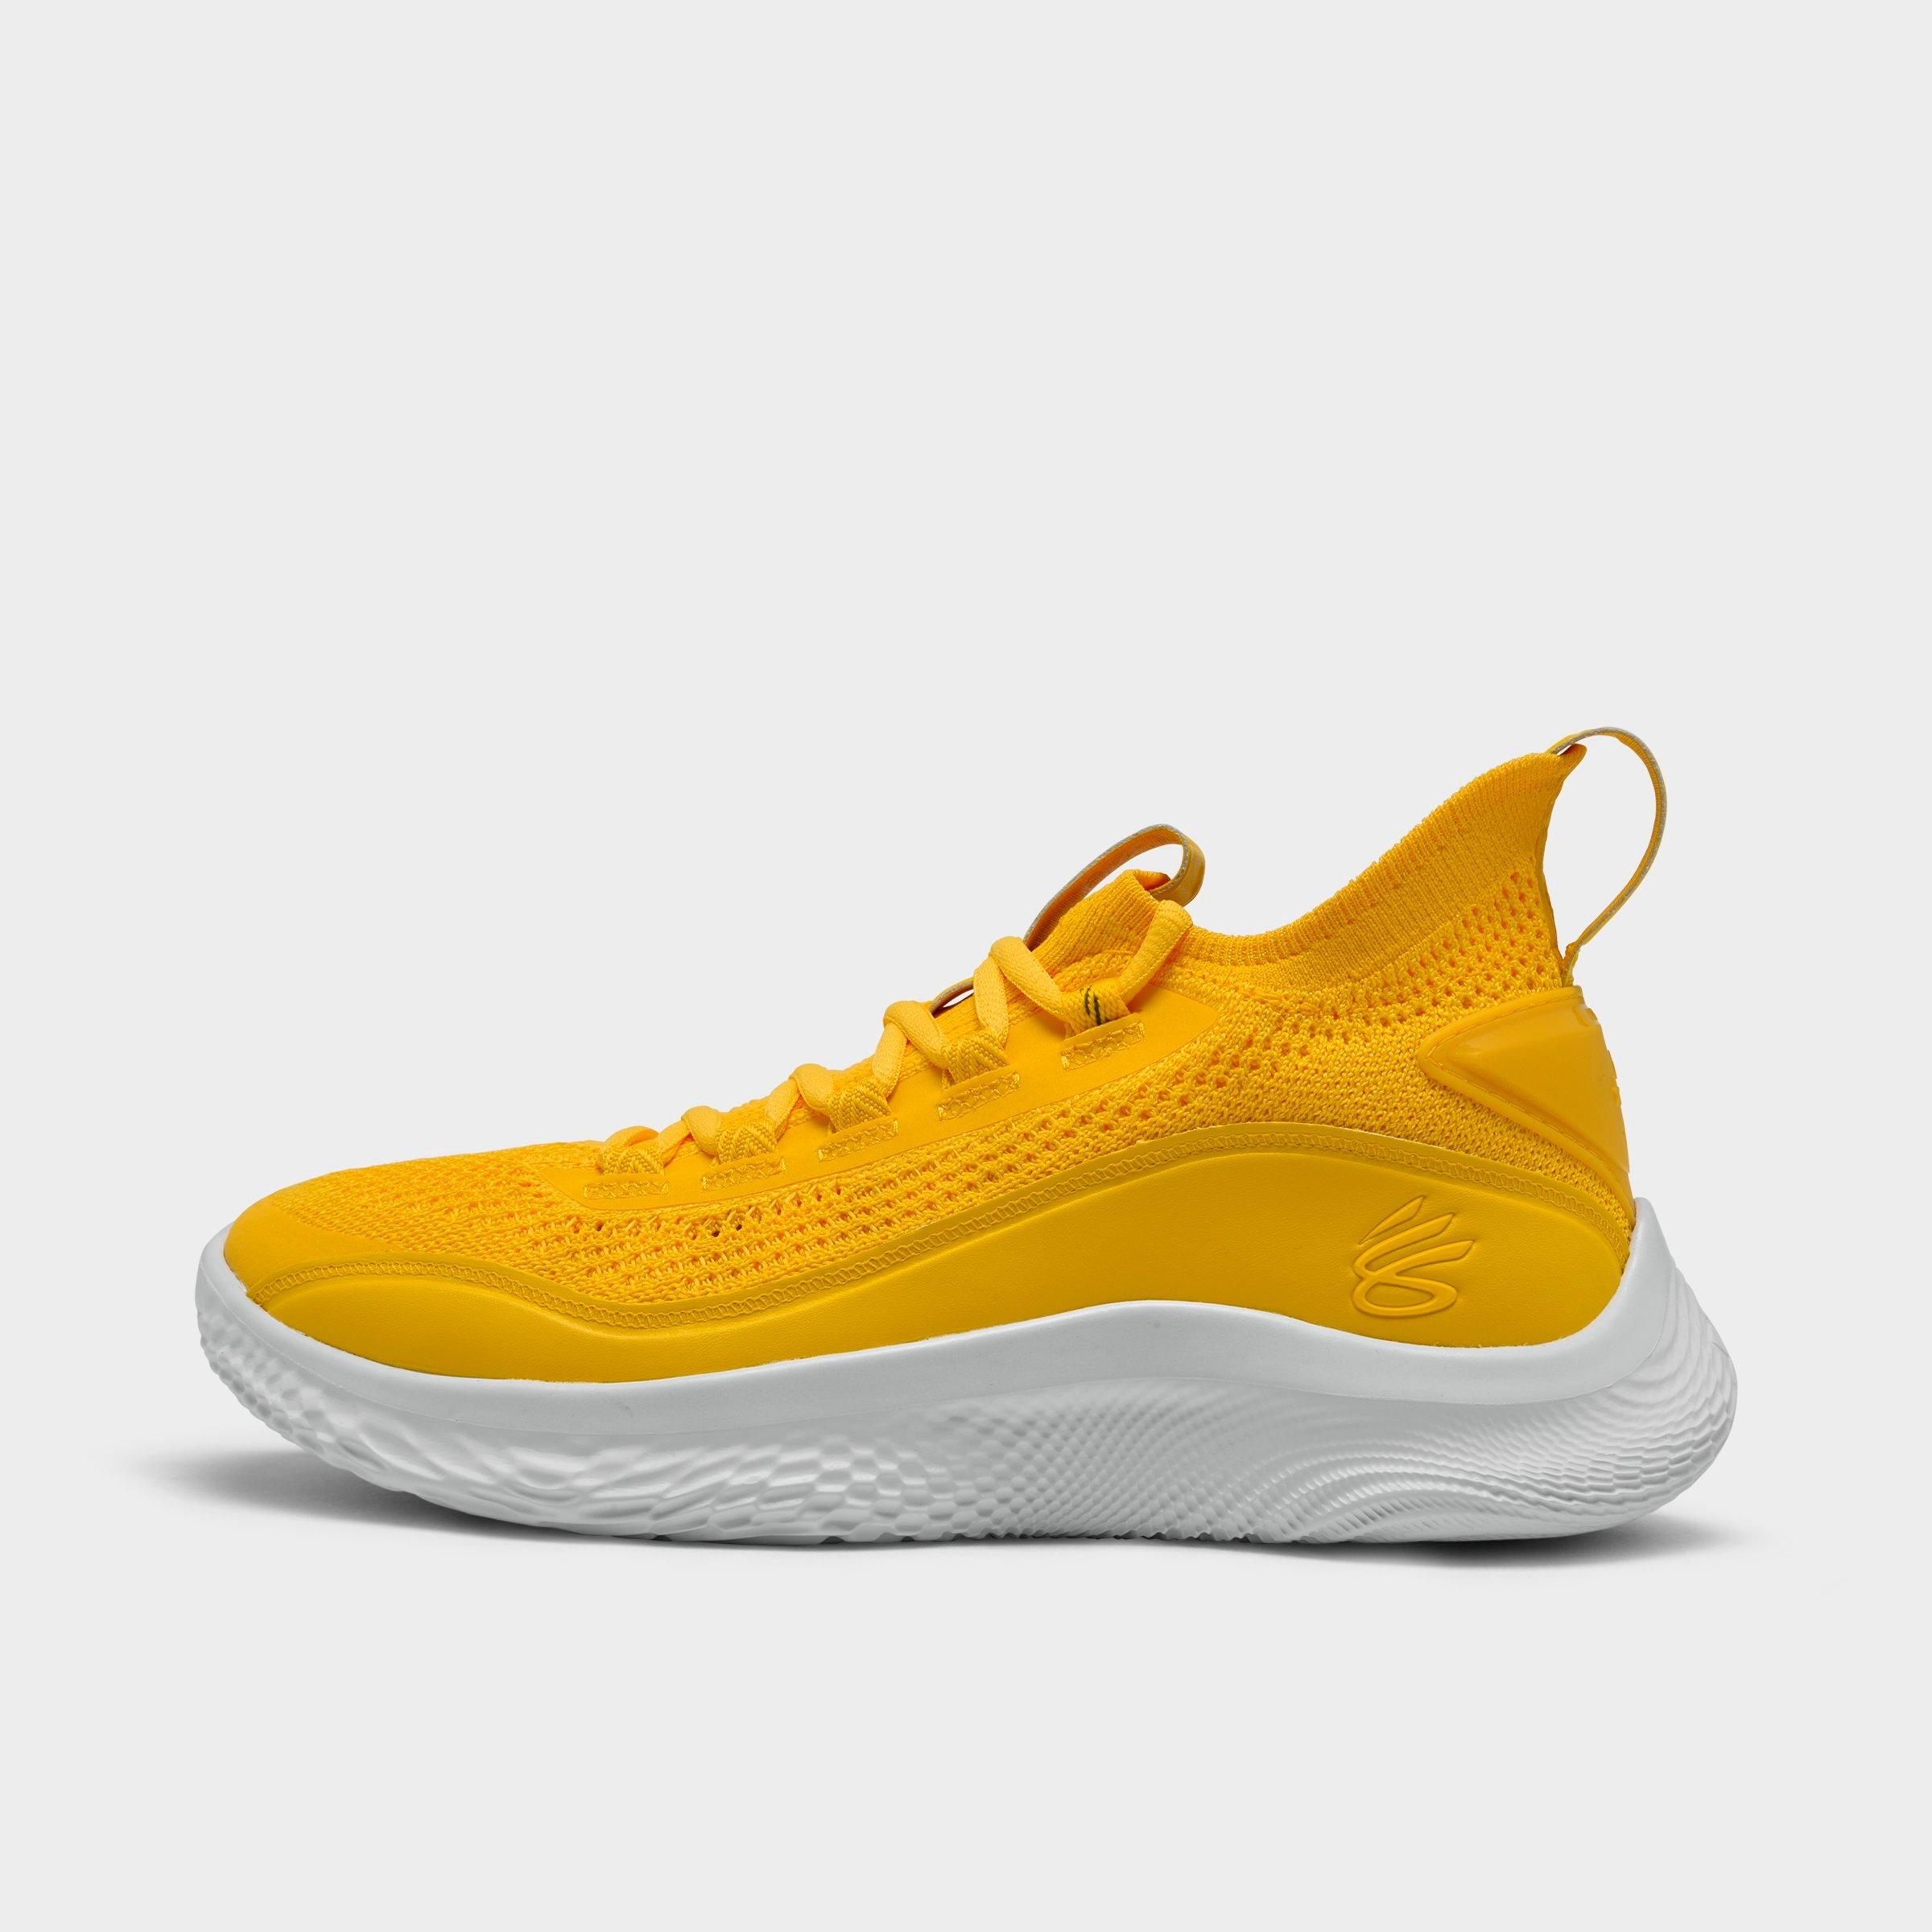 curry basketball shoes mens